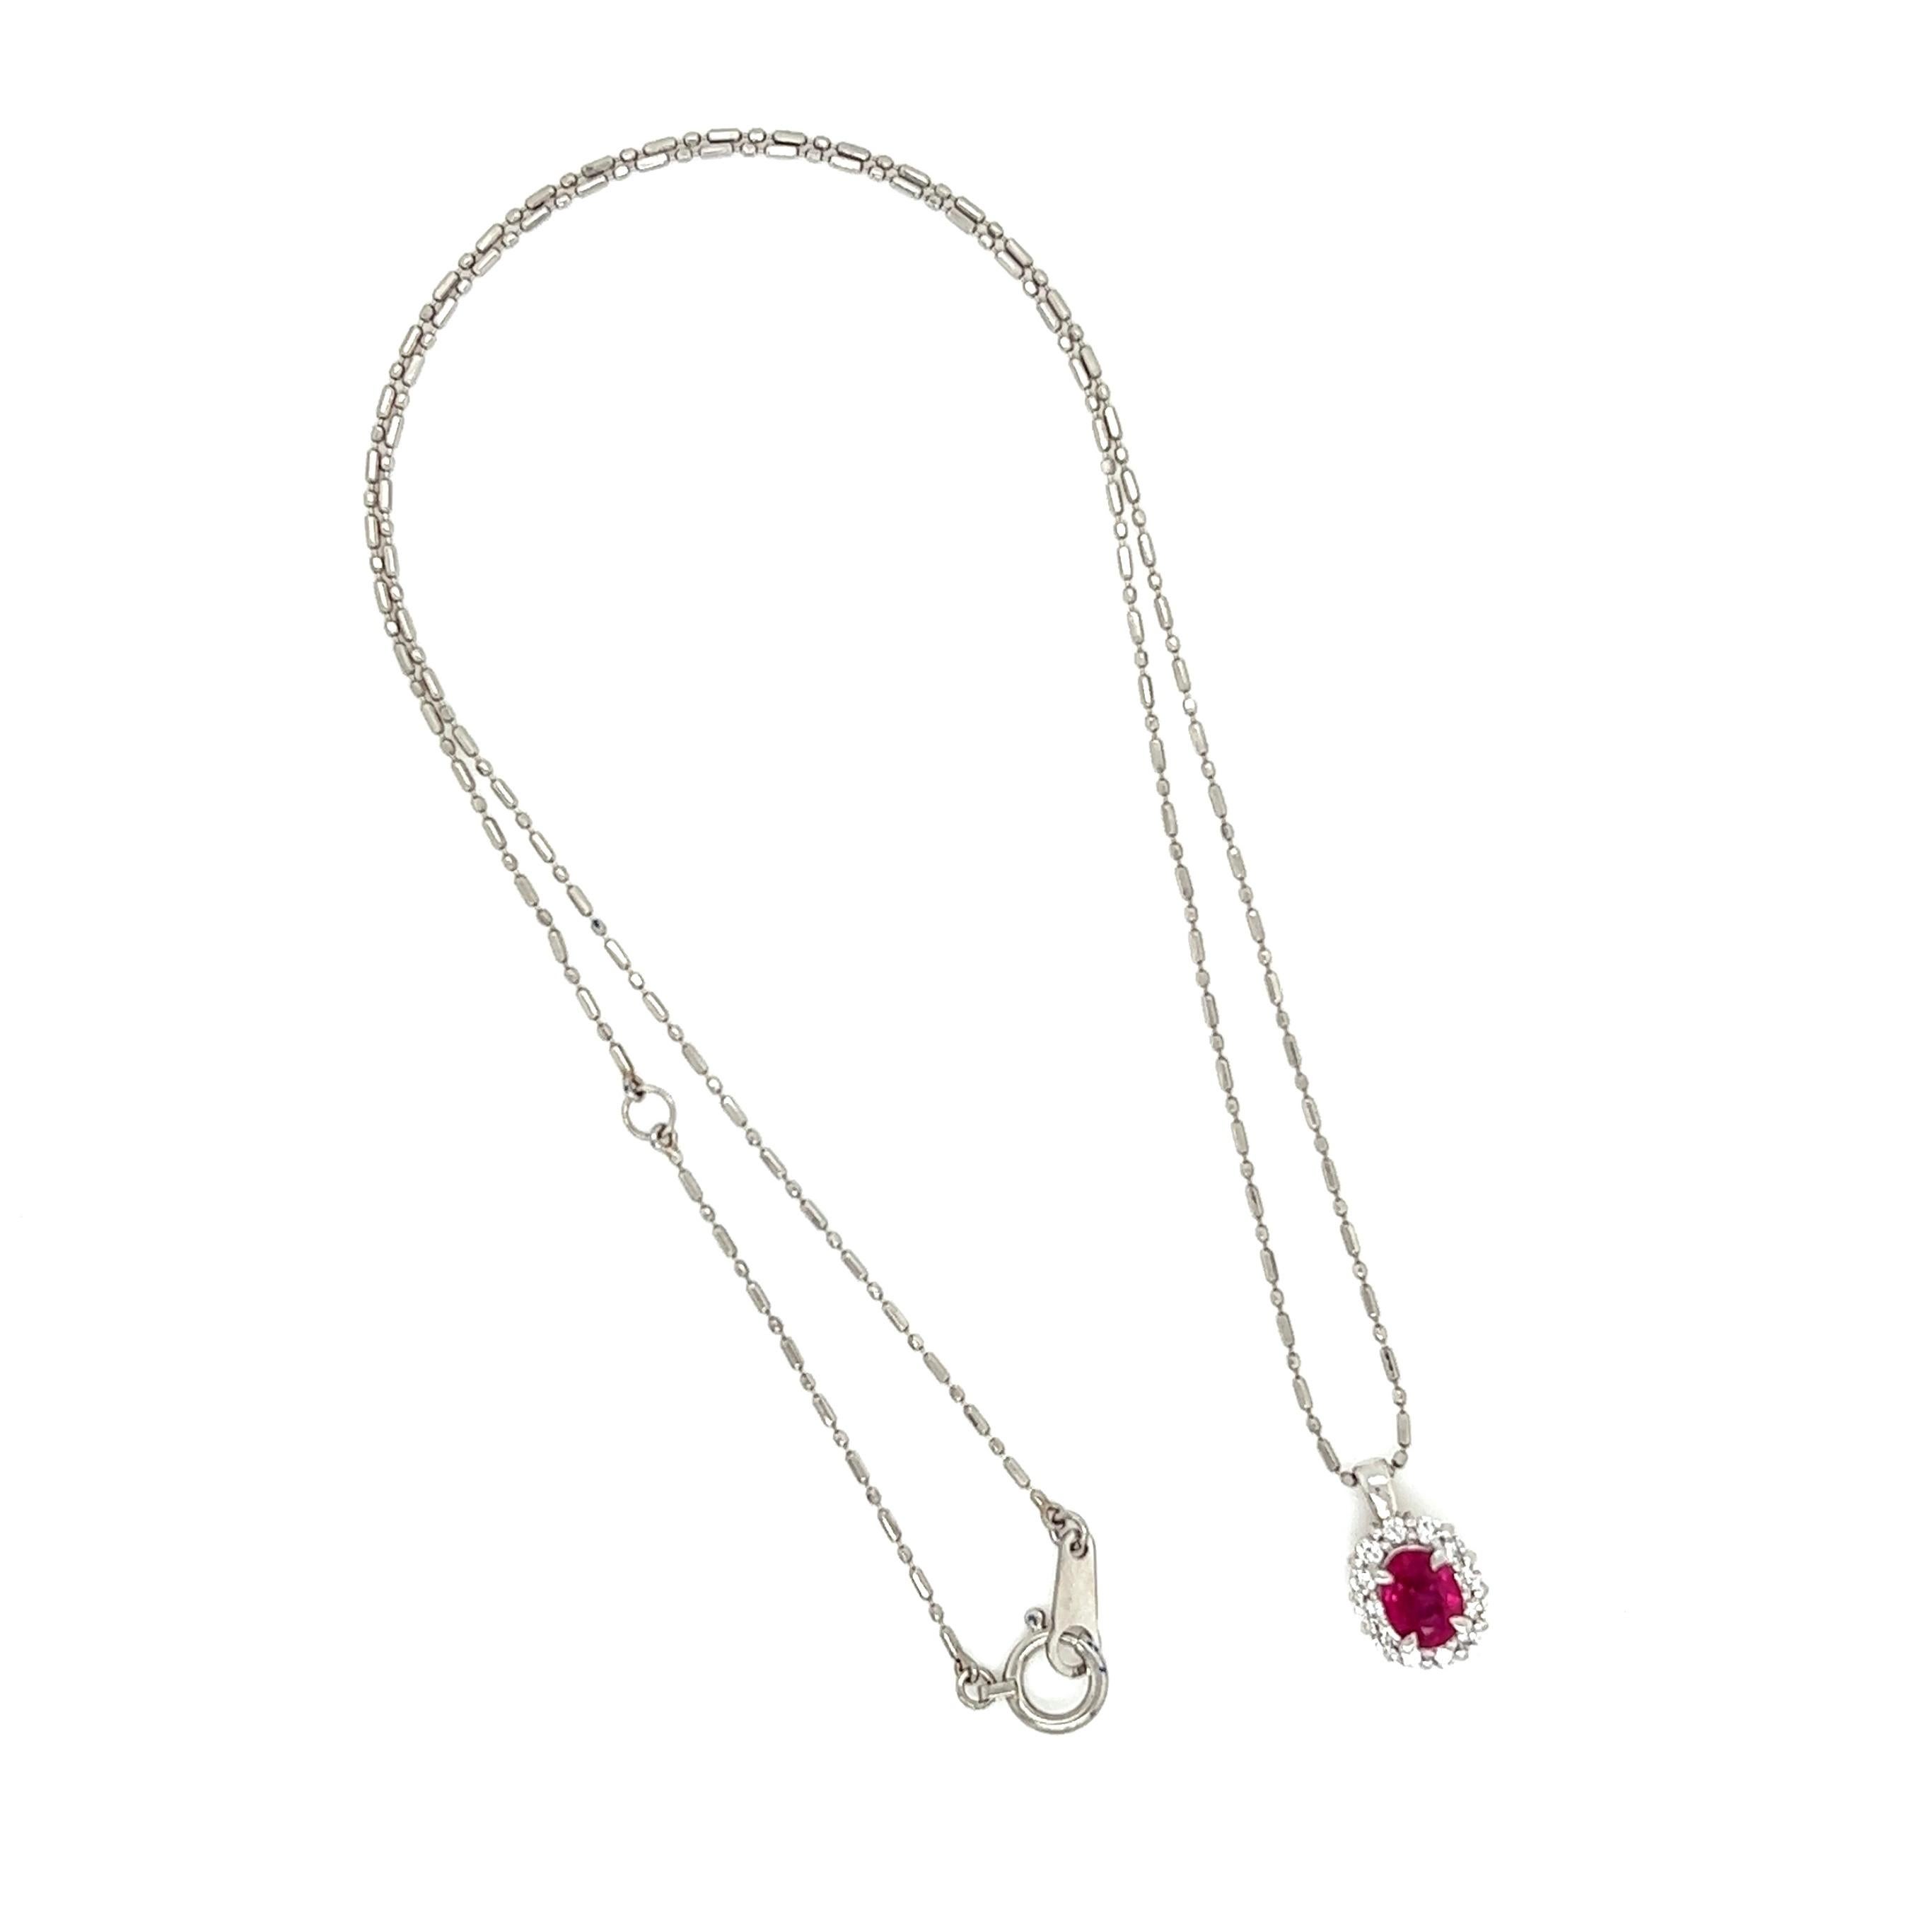 Simply Beautiful! Solitaire Ruby and Diamond Halo Necklace. Center securely Hand set with an Oval Ruby approx. 0.61 Carat, surrounded by Diamonds, approx. 0.40tcw. Suspended on a 16